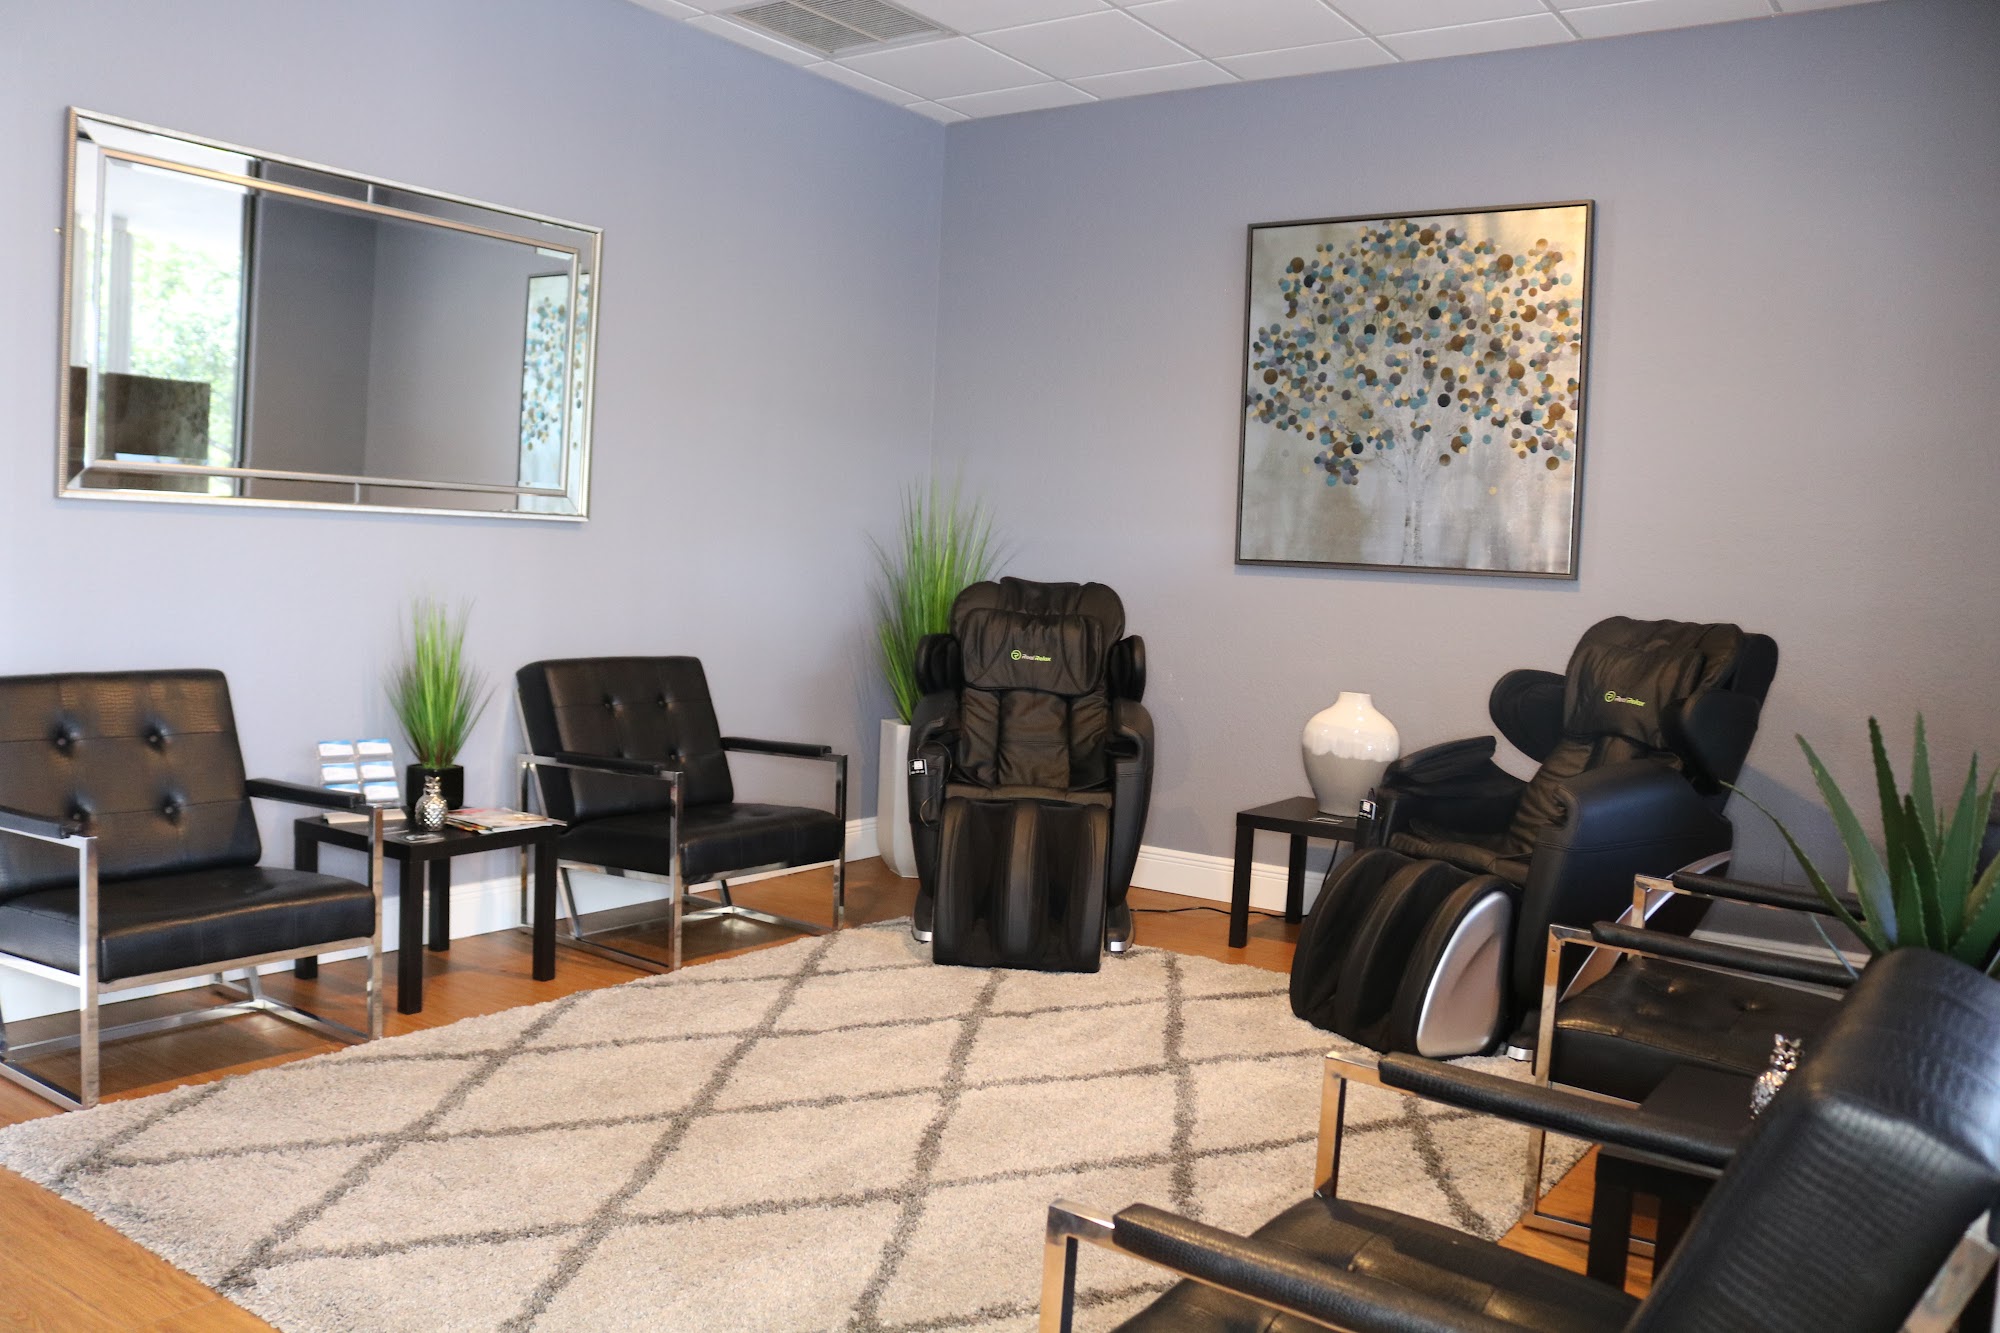 Fusion Chiropractic Spa